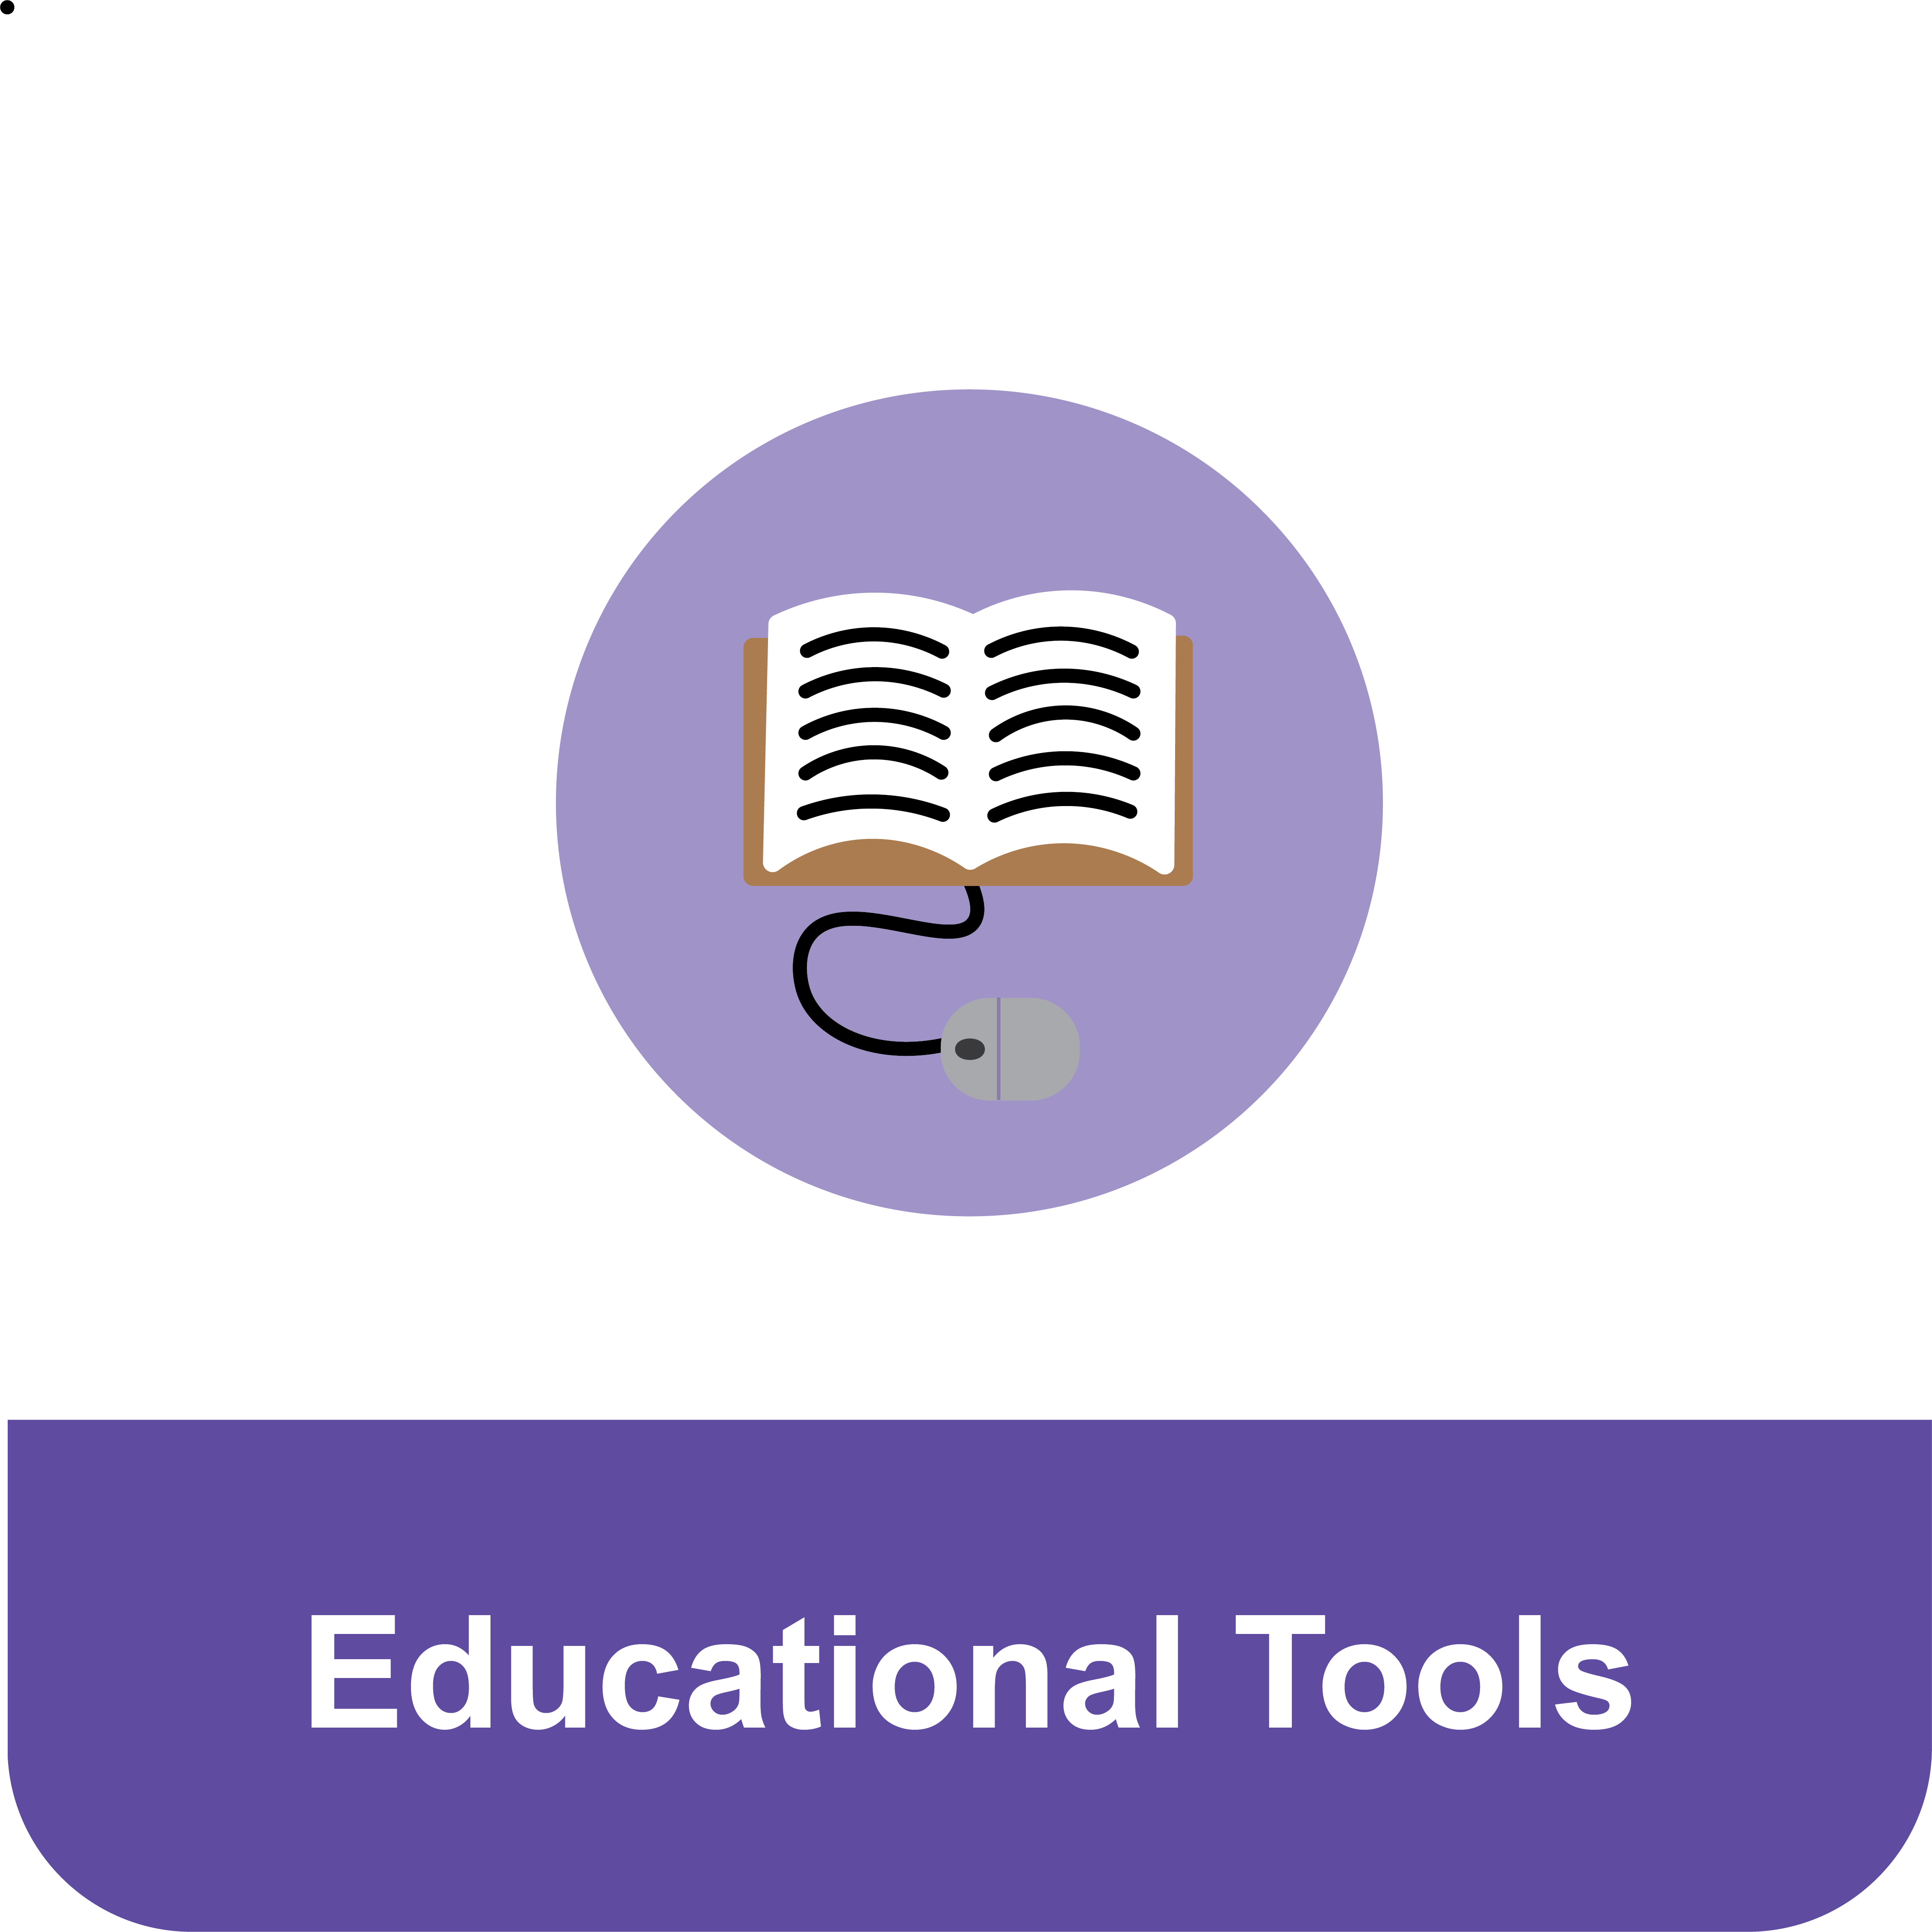 Title that reads "Educational Tools" under an icon of an open book and a computer mouse.